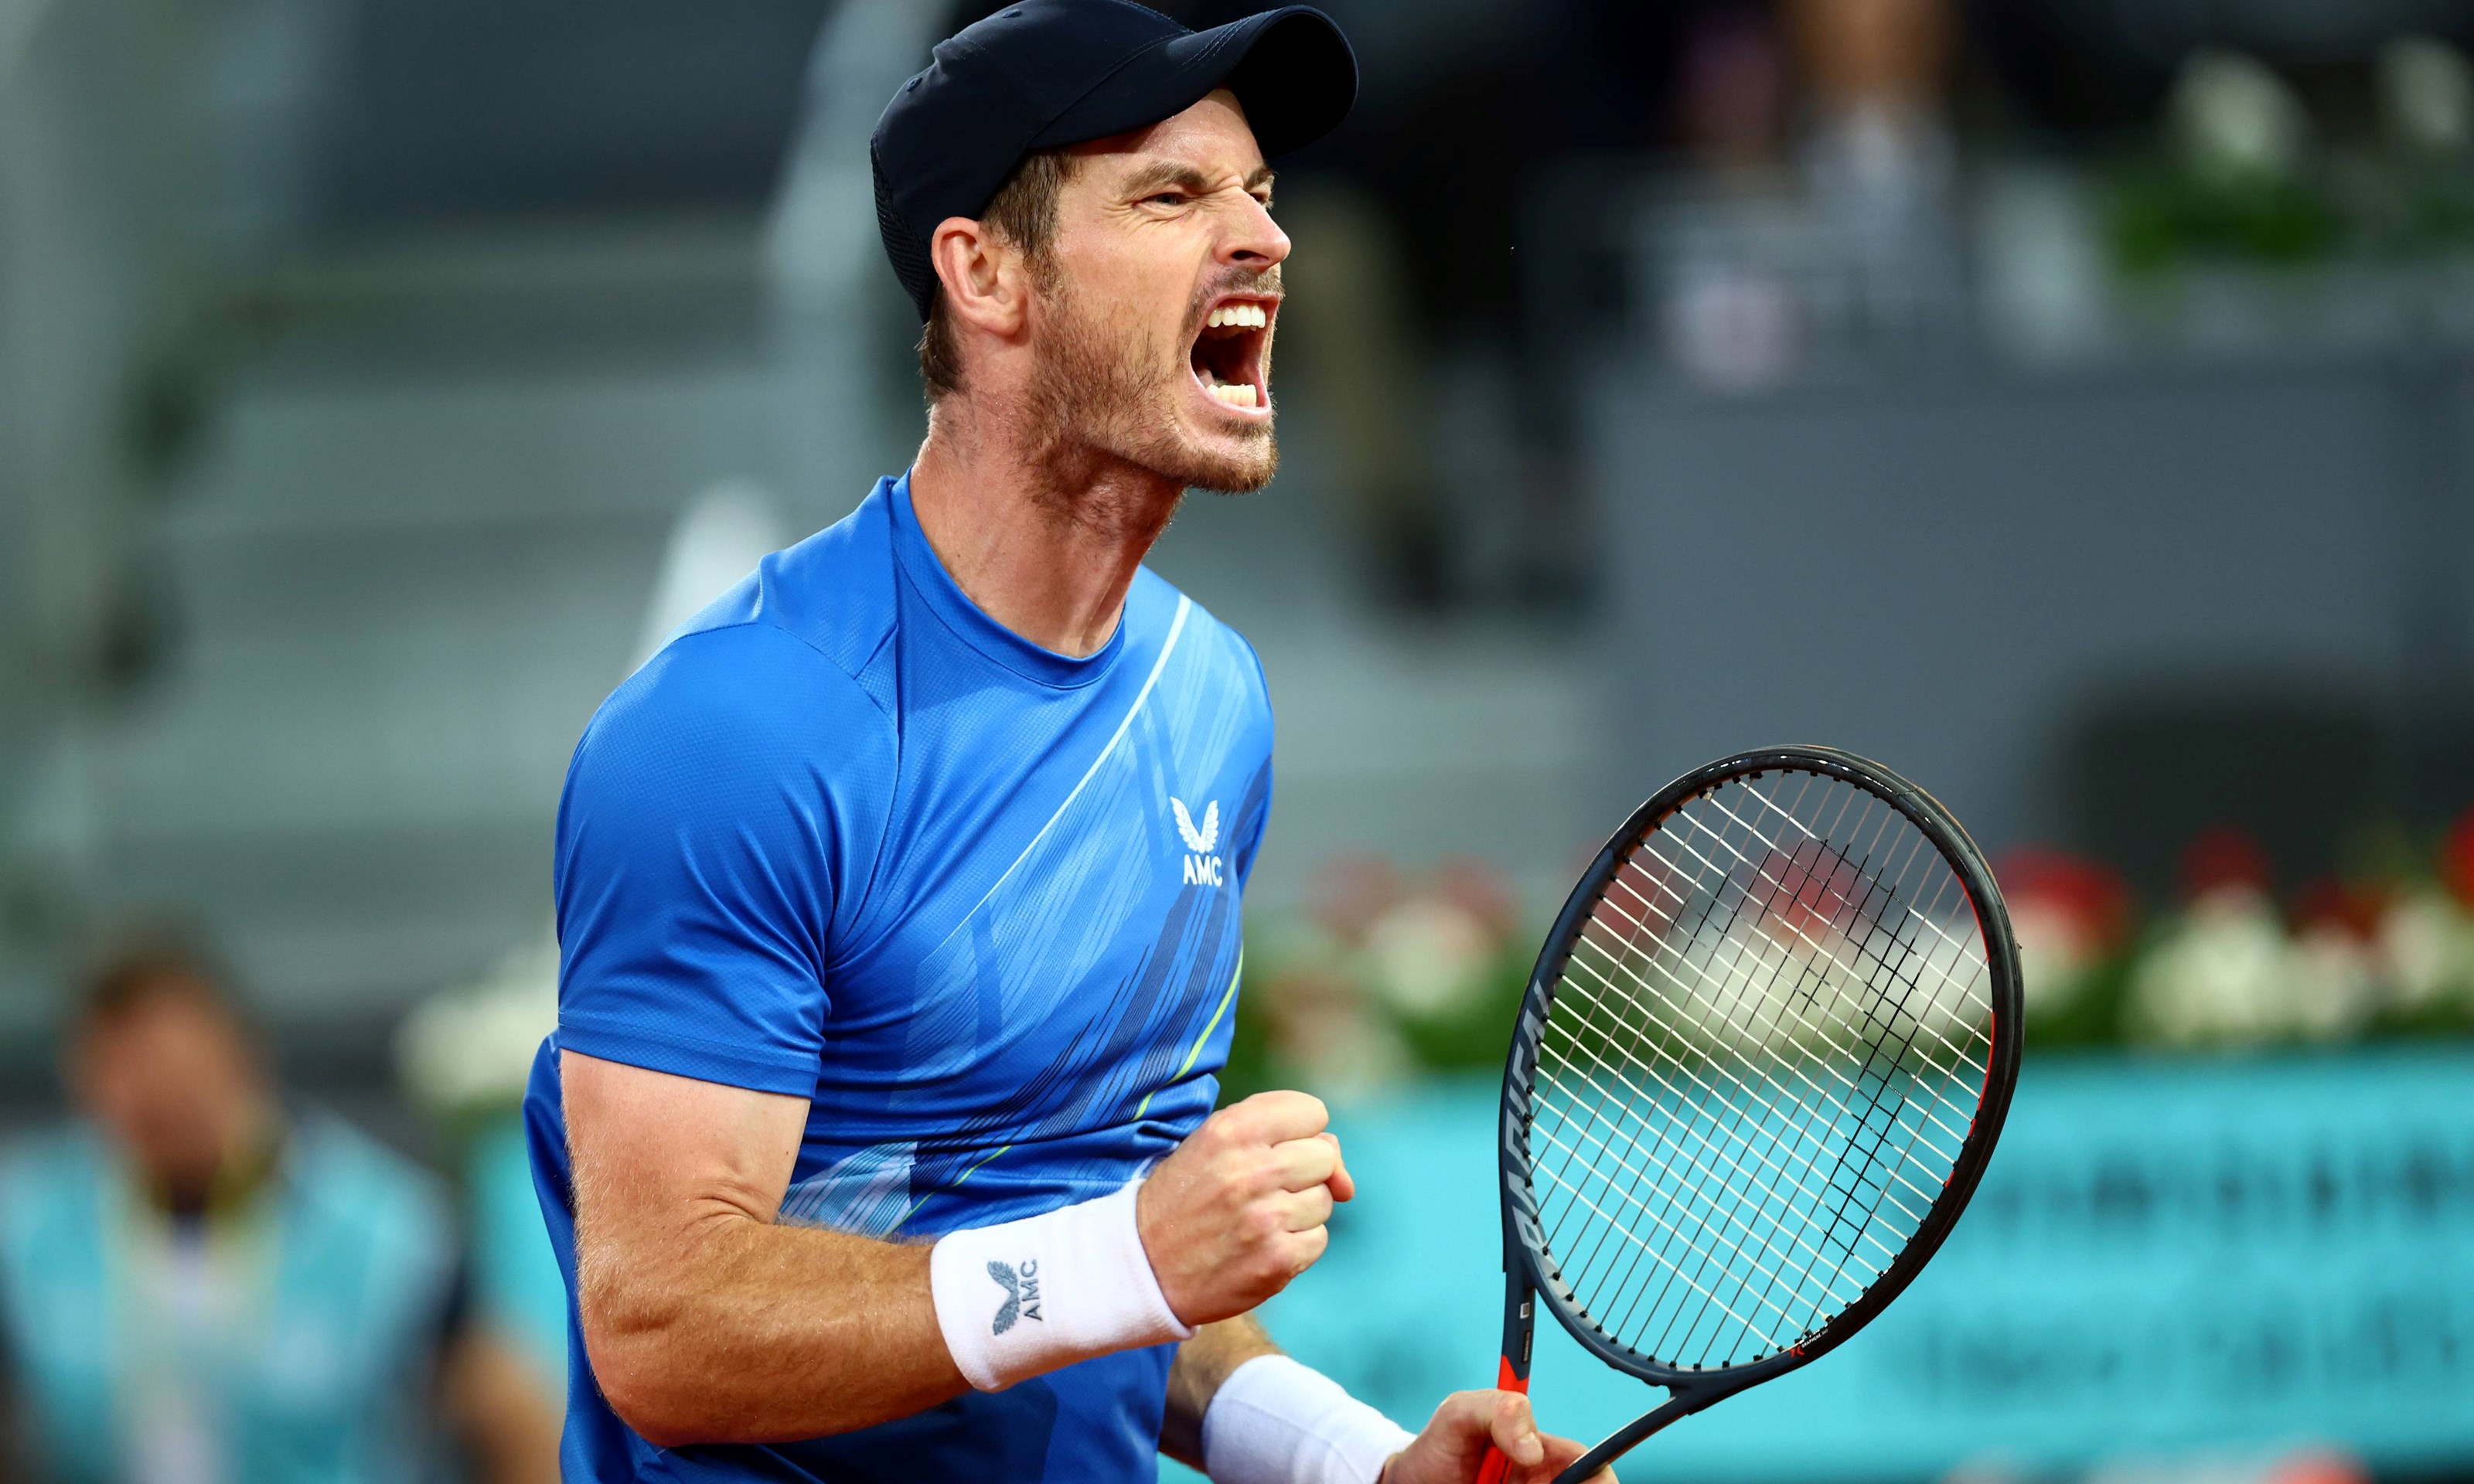 2022 Andy Murray Madrid Open R1 ?w=3200&h=1920&mode=crop